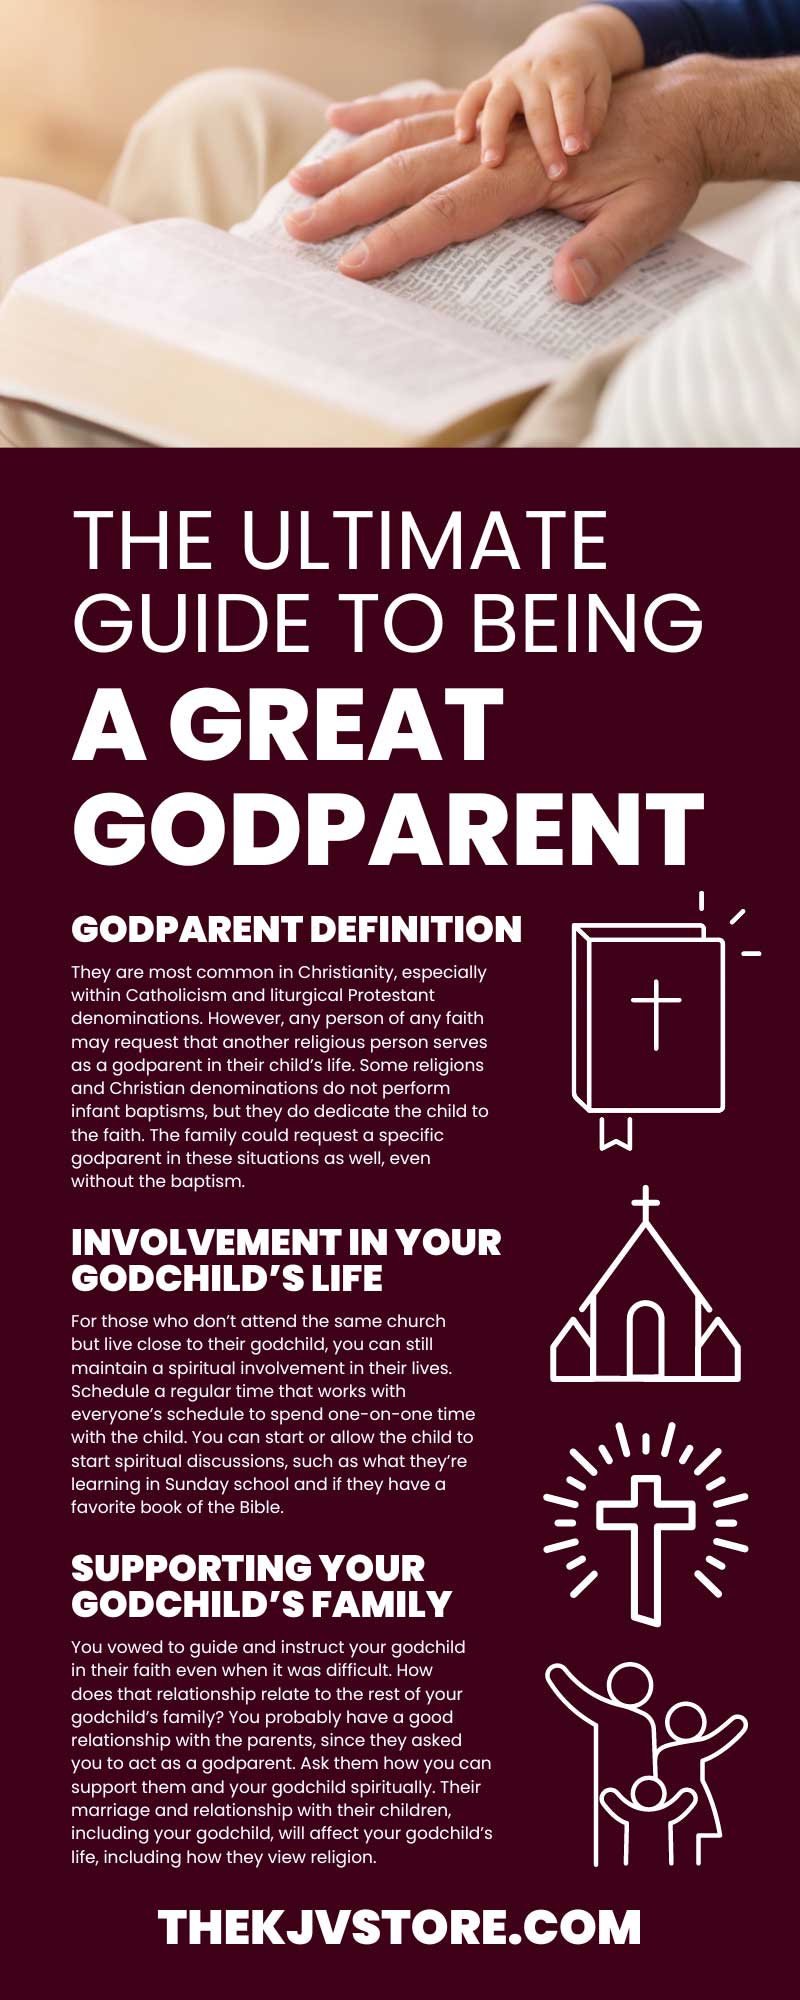 The Ultimate Guide to Being a Great Godparent